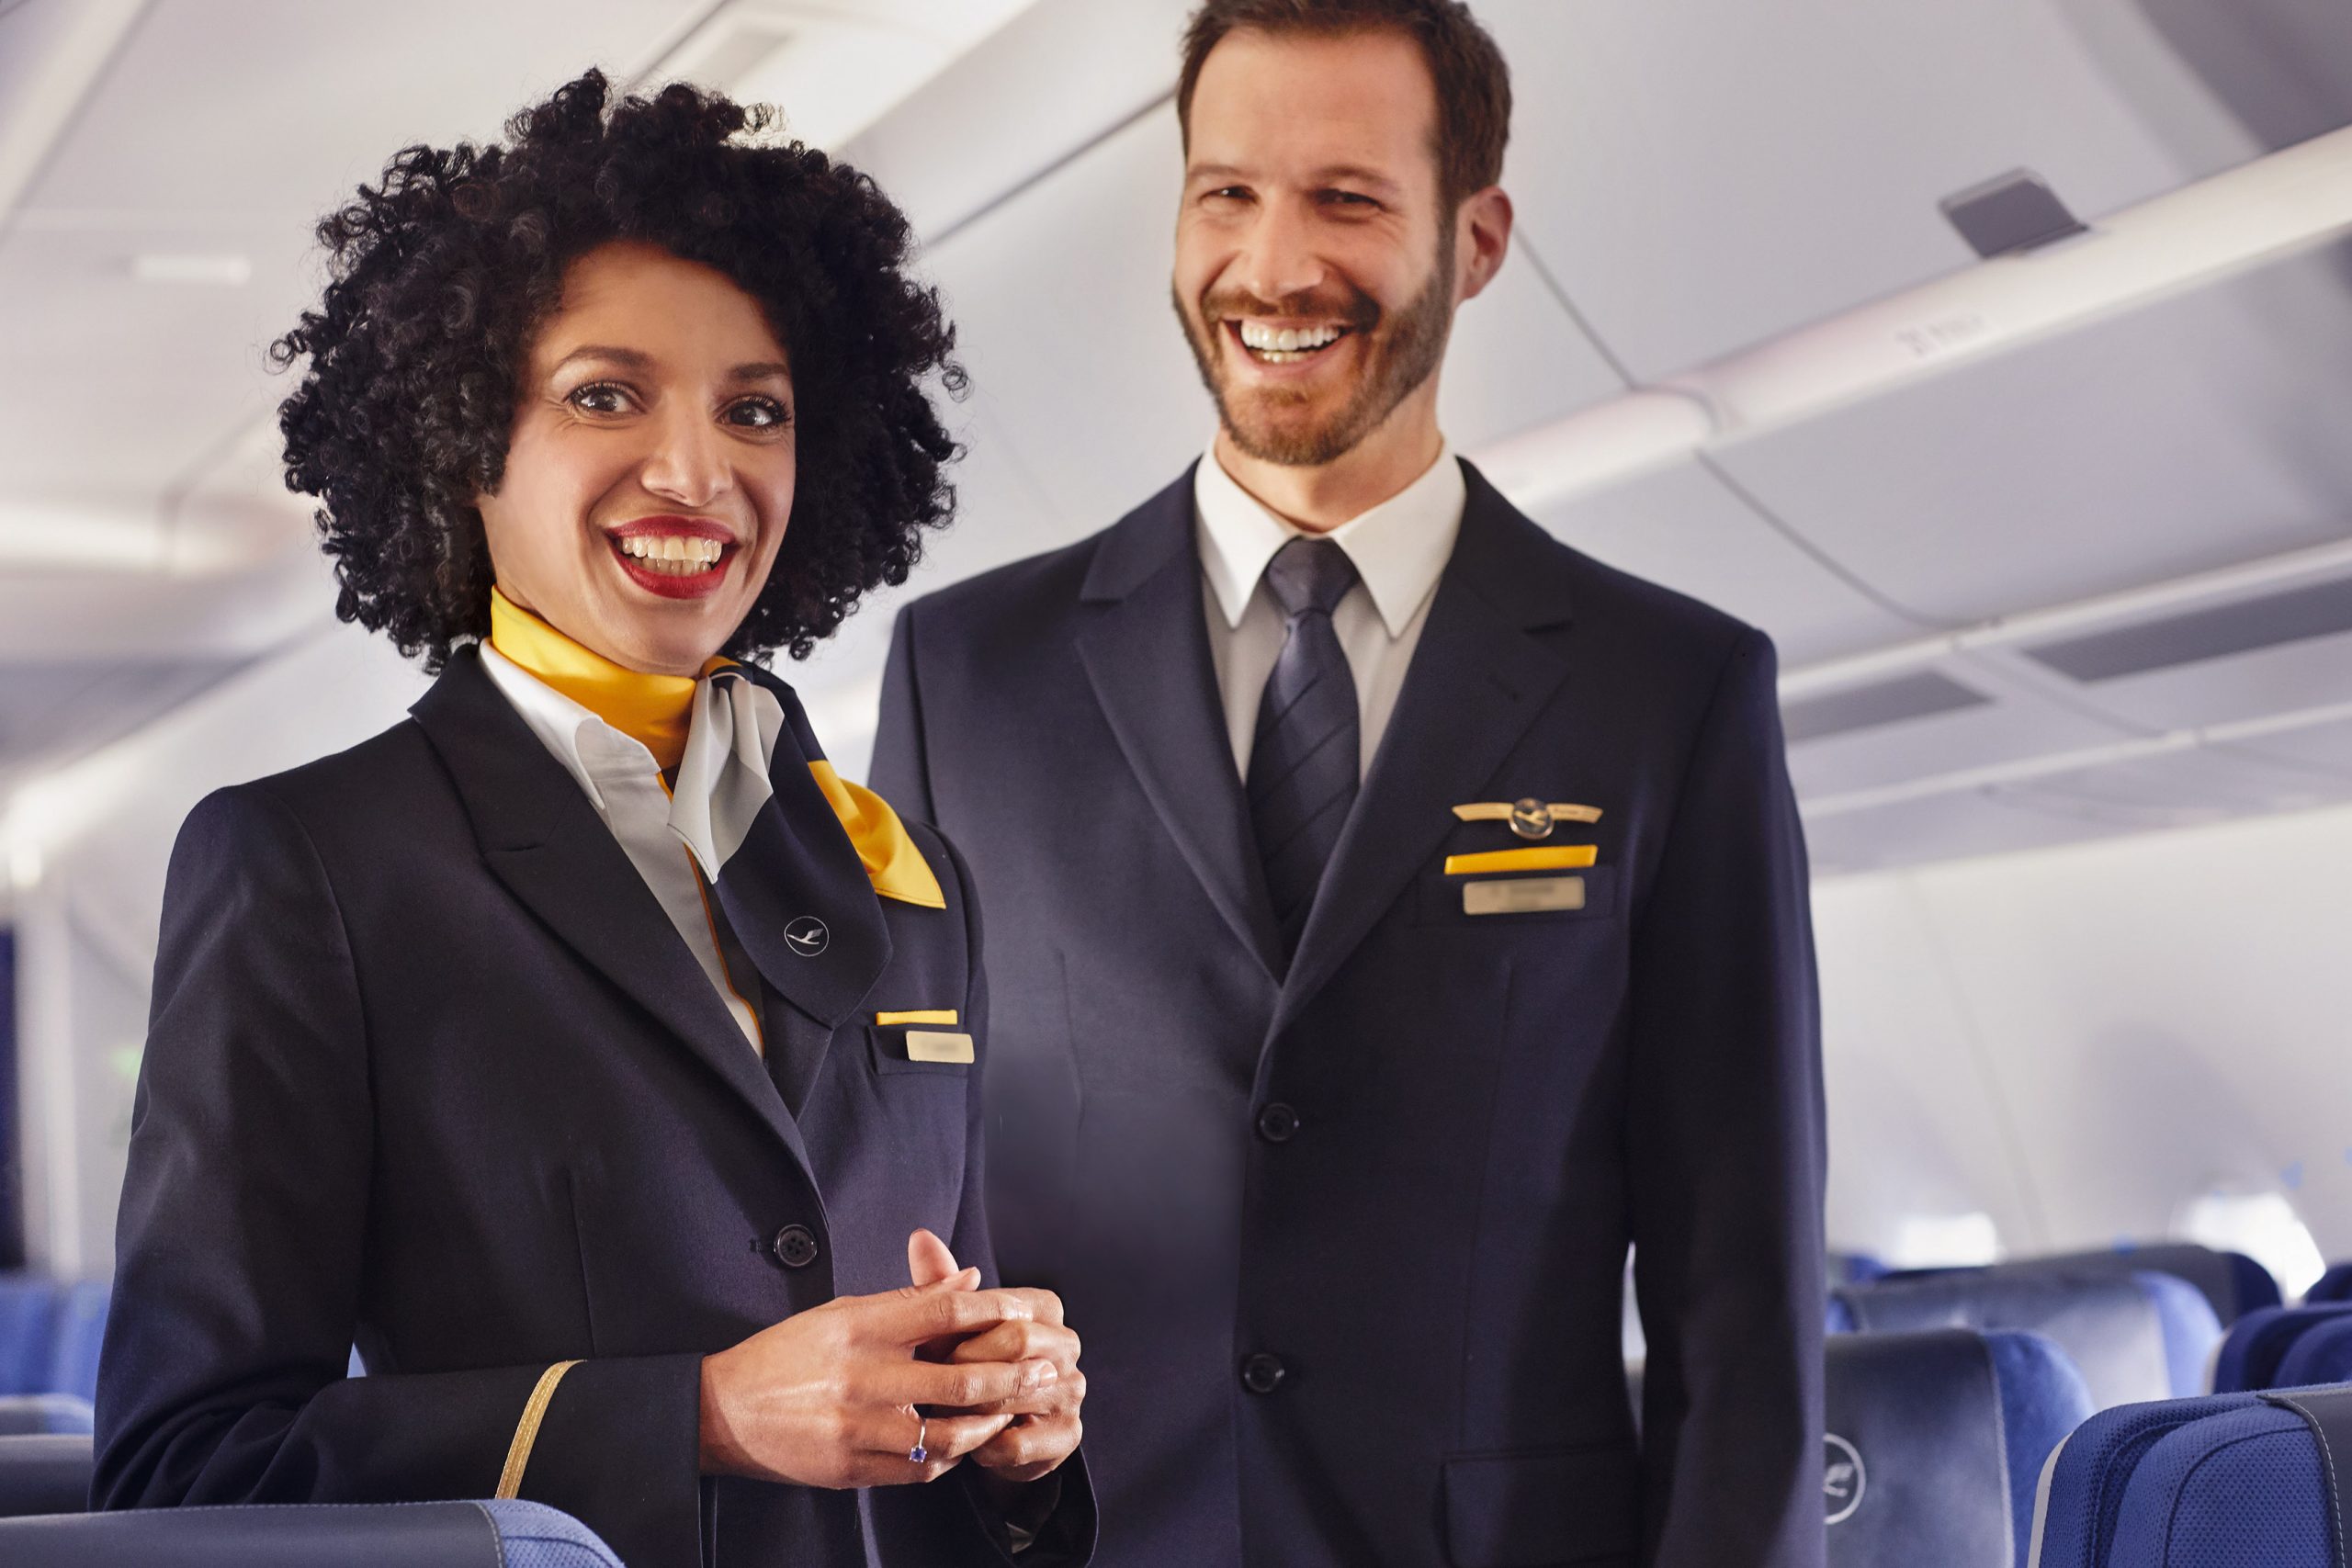 Becoming a flight attendant is more difficult than getting into Harvard